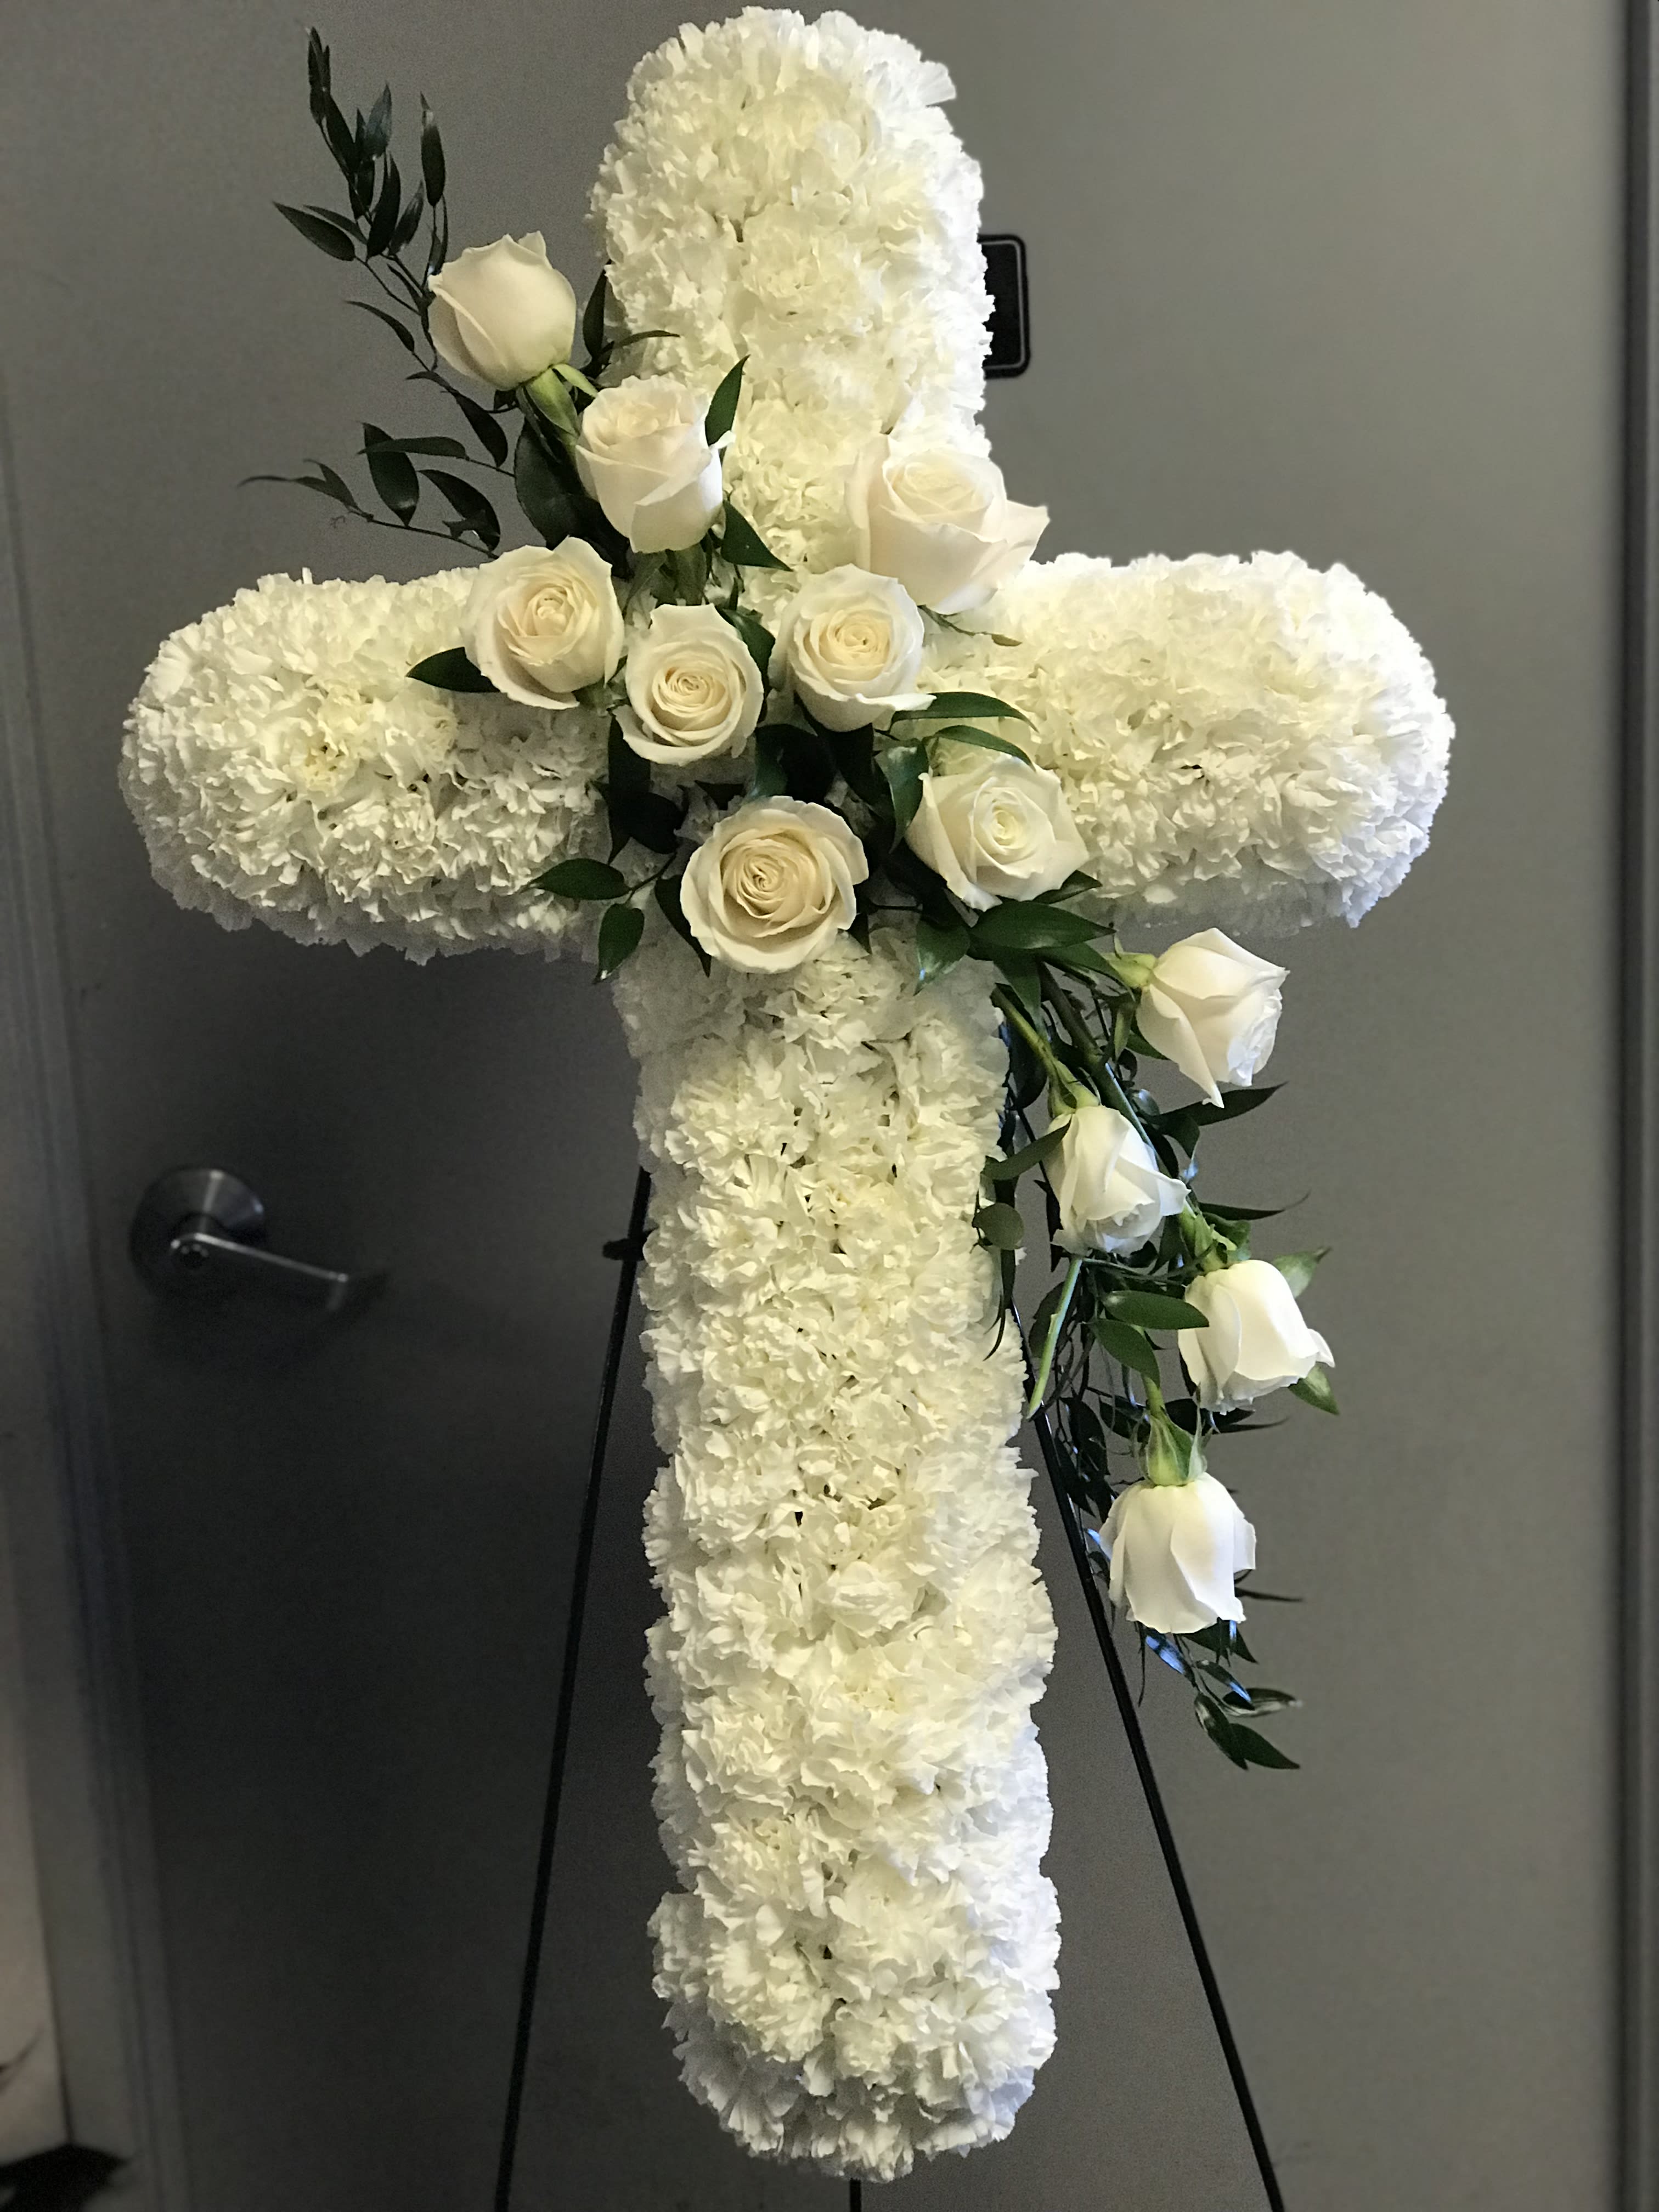  All White Cross -  White carnations are arranged in the shape of a cross accented in the middle with white roses and spray roses and along the sides with lush greens 